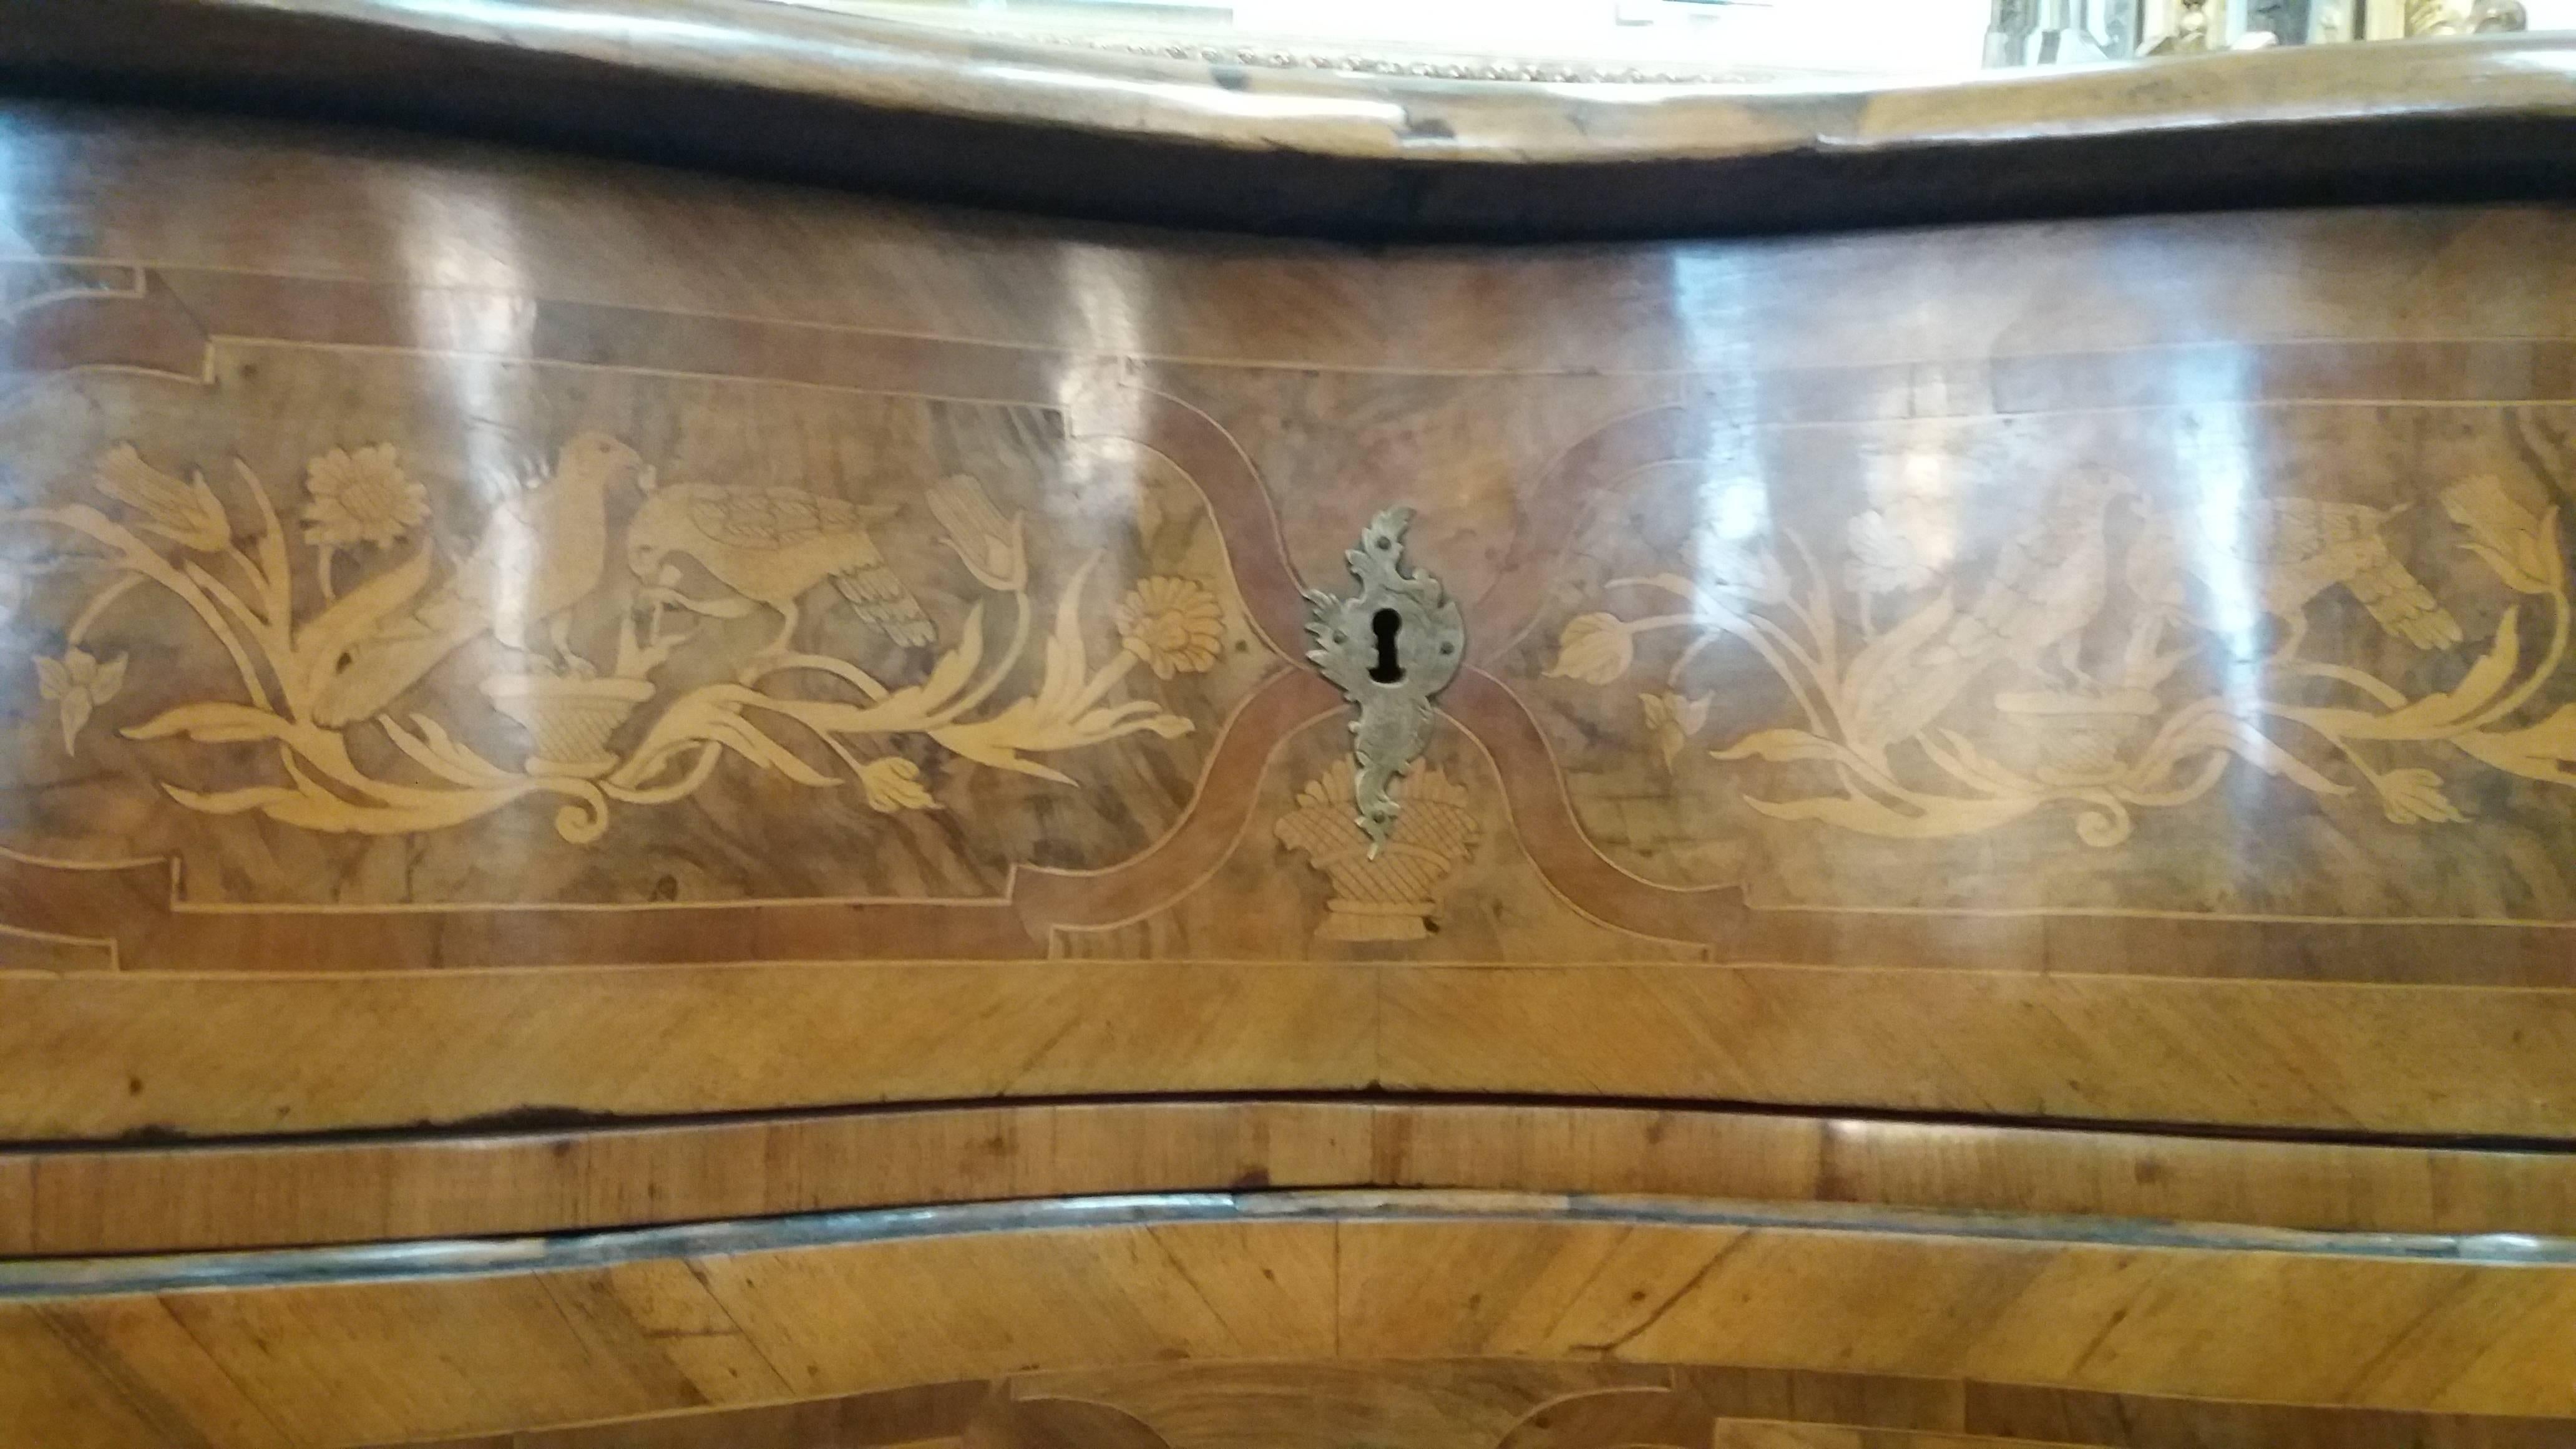 Swiss inlaid chest of drawers. The top features various inlaid hunting figures
Even the sides of the dresser are inlaid.
It is restored.